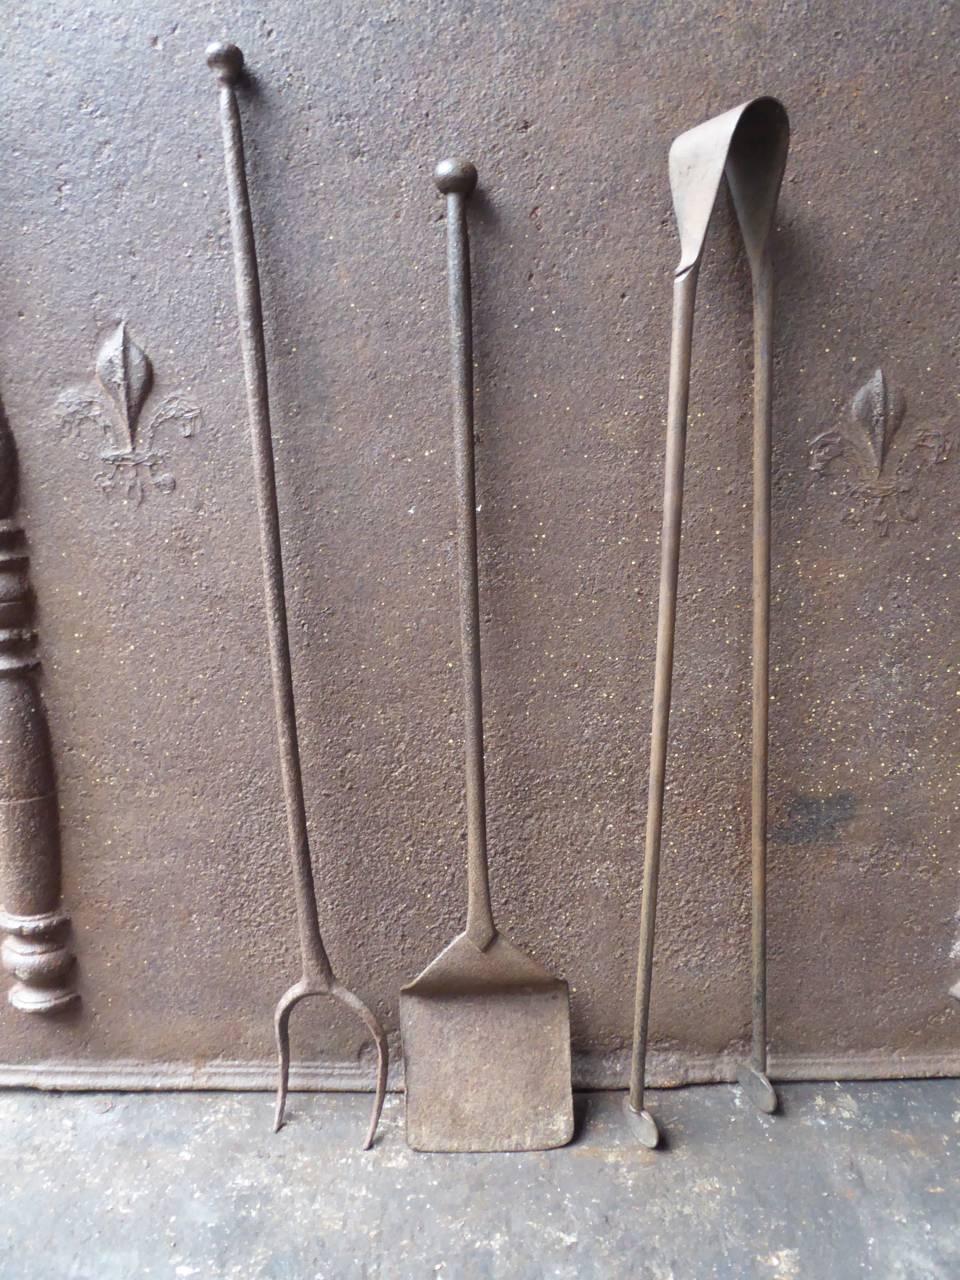 18th century French fireplace tool set made of wrought iron.

We have a unique and specialized collection of antique and used fireplace accessories consisting of more than 1000 listings at 1stdibs. Amongst others, we always have 300+ firebacks, 250+